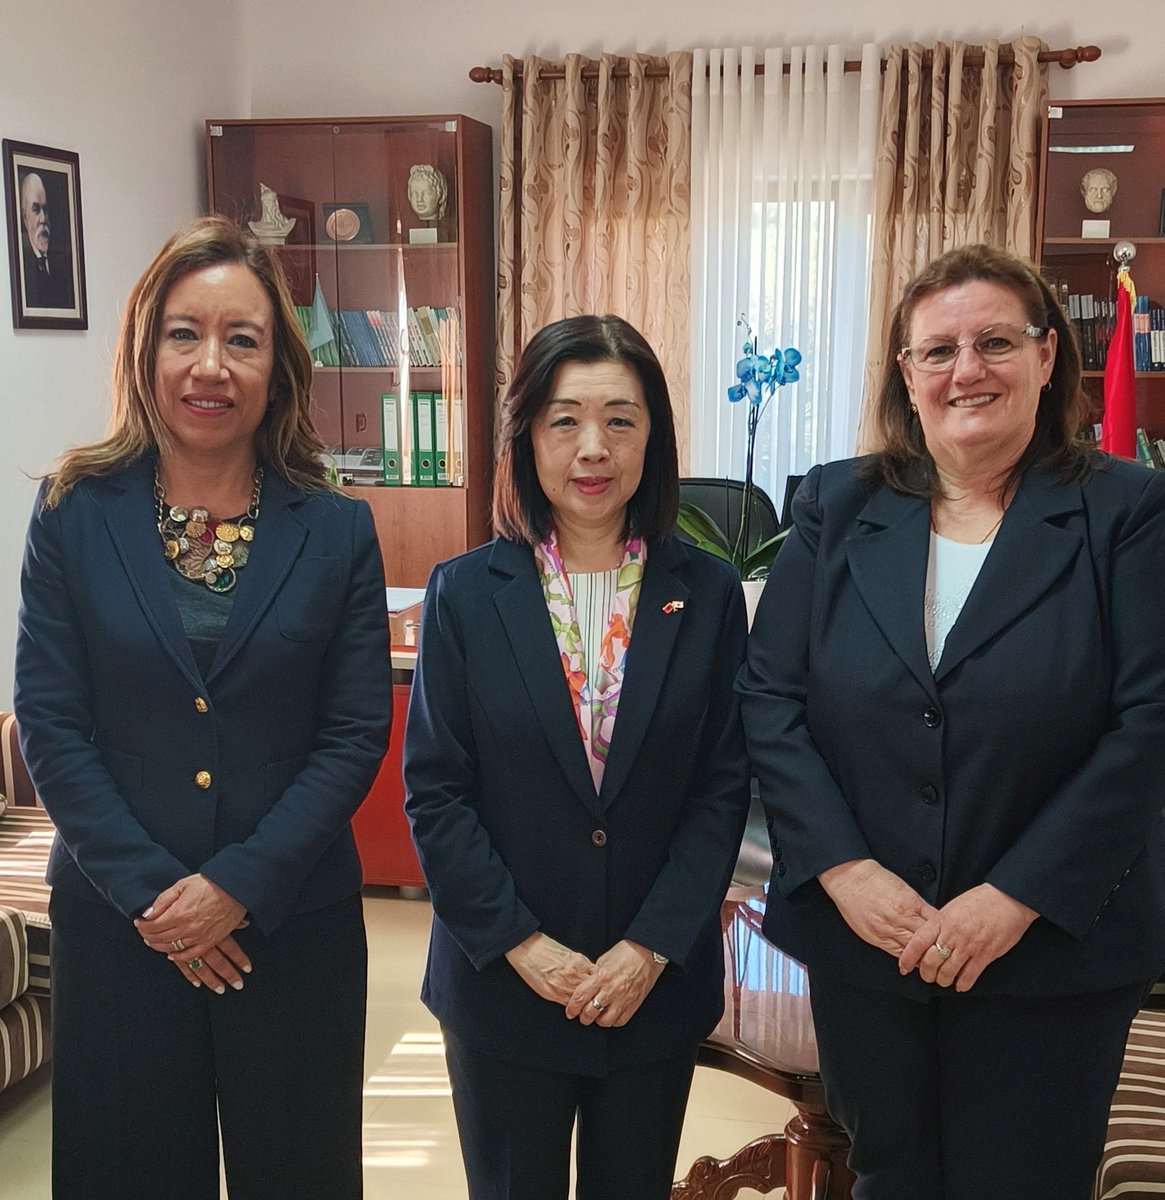 Happy to be in Klos& Peshkopi with the Ambassador of #Japan to #Albania to hand over 6 photovoltaic systems installed in public buildings. Grateful to @MofaJapan_en - a @UNDP #PartnerAtCore for their partnership& funding.This project is a promise for a climate-resilient future.